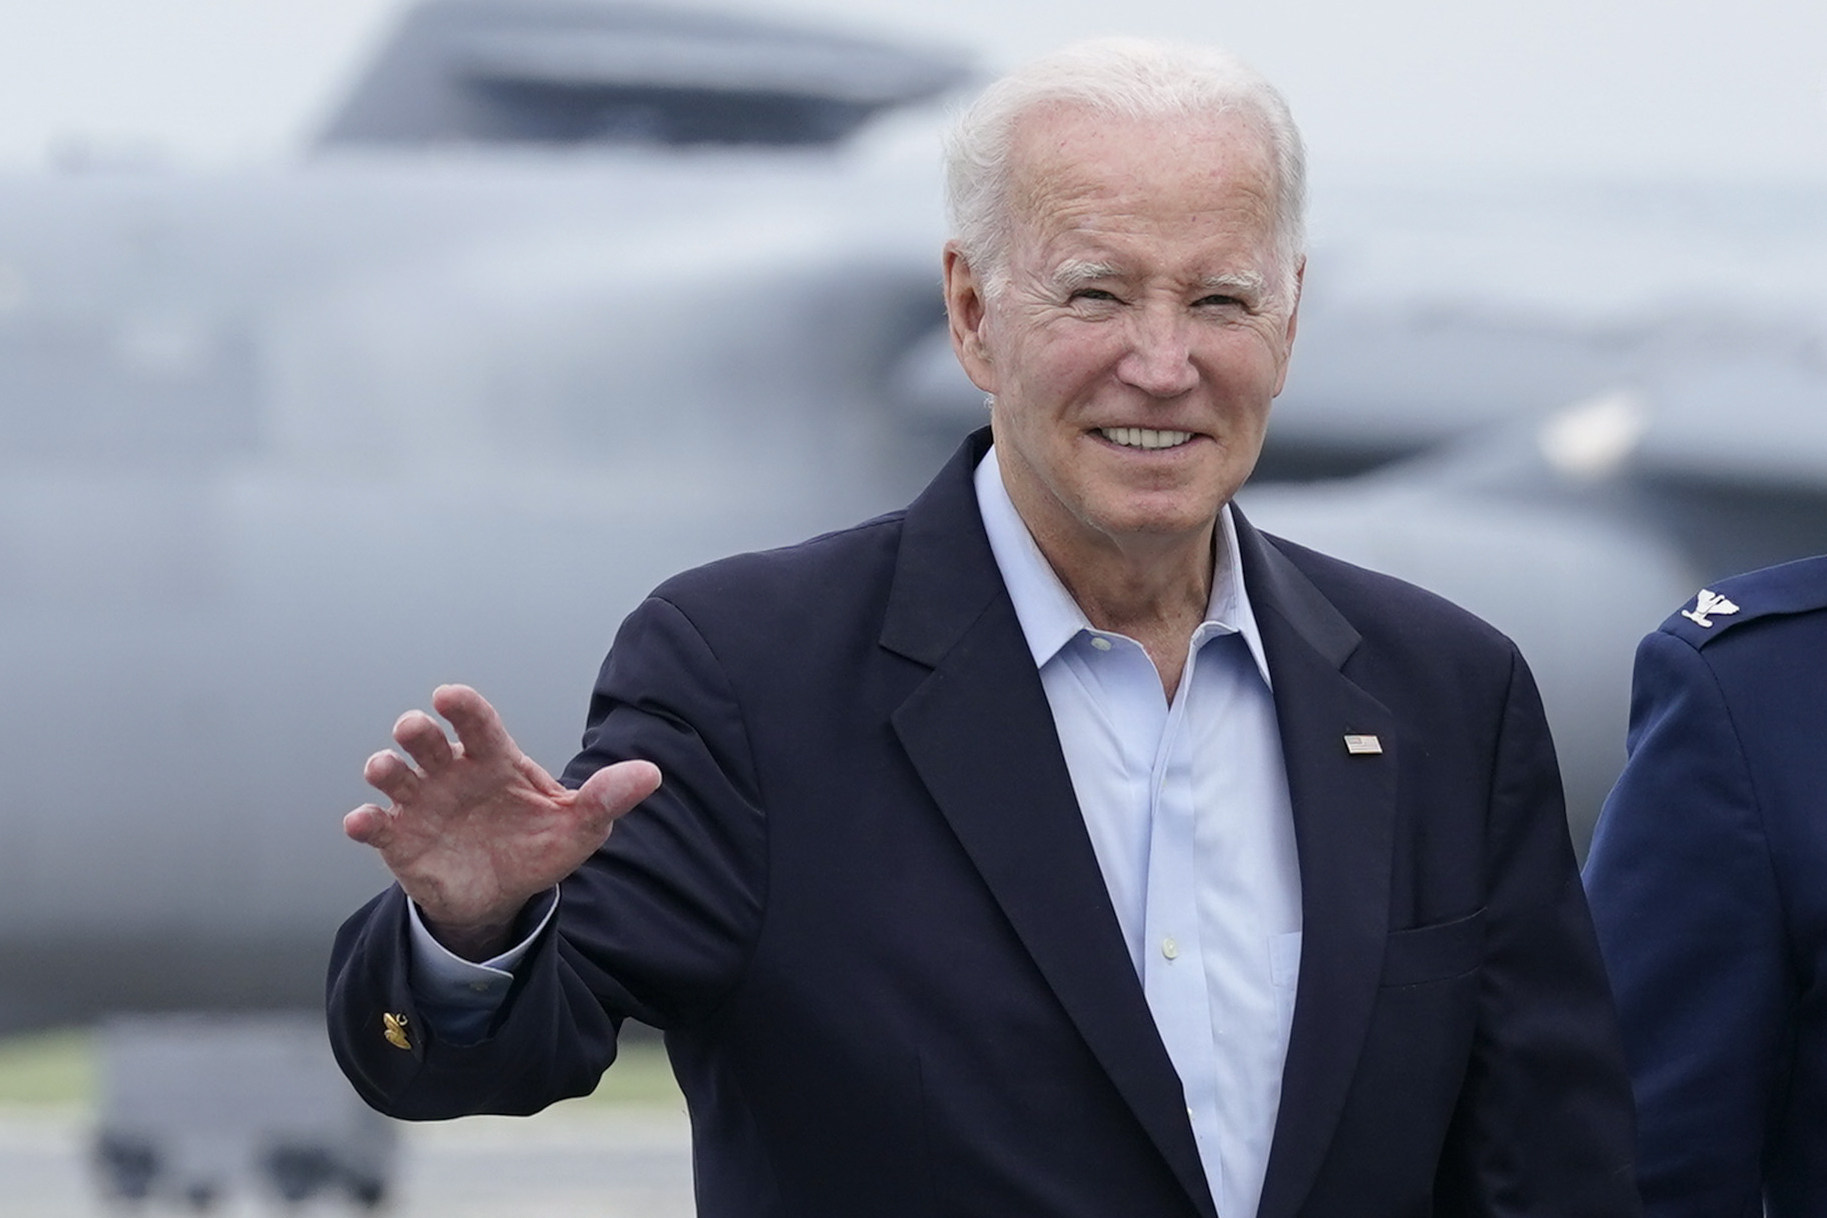 US President Joe Biden waves as he prepares to board Air Force One in Delaware, US on Sunday for his flight to Britain. Photo: AP